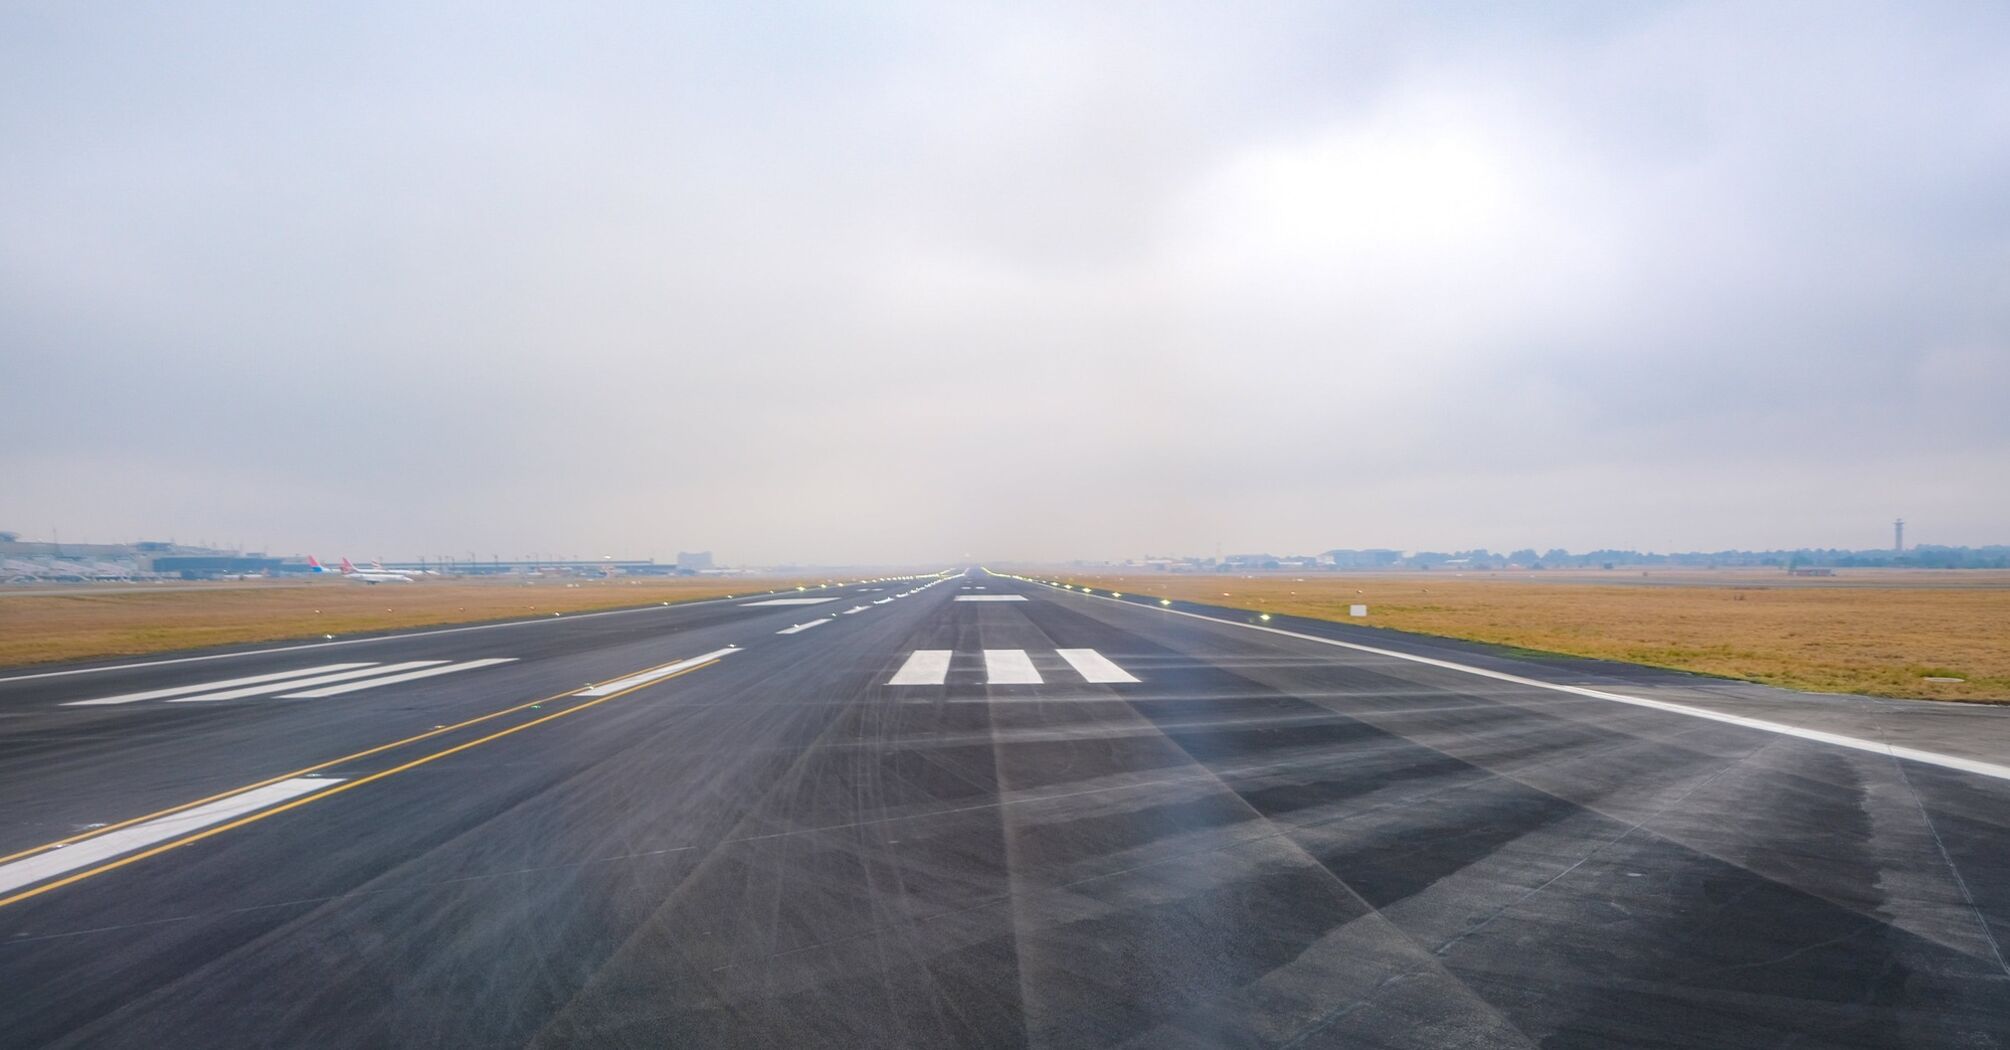 View of an empty runway at an airport 